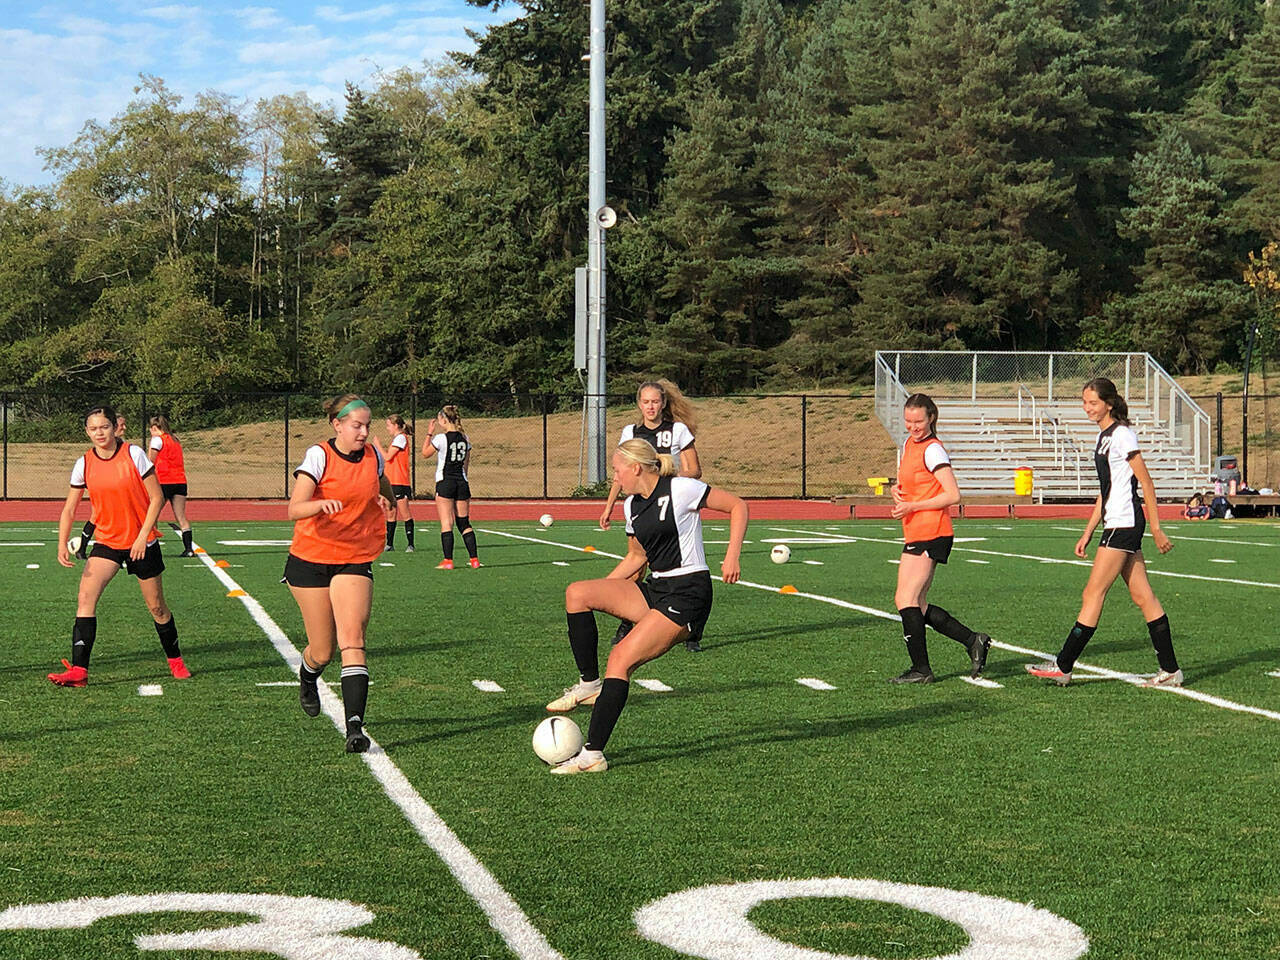 (Jenni Wilke Photo) Local youth sports groups utilize athletic facilities, like the soccer fields, at a low cost as part of the Commons Agreement.